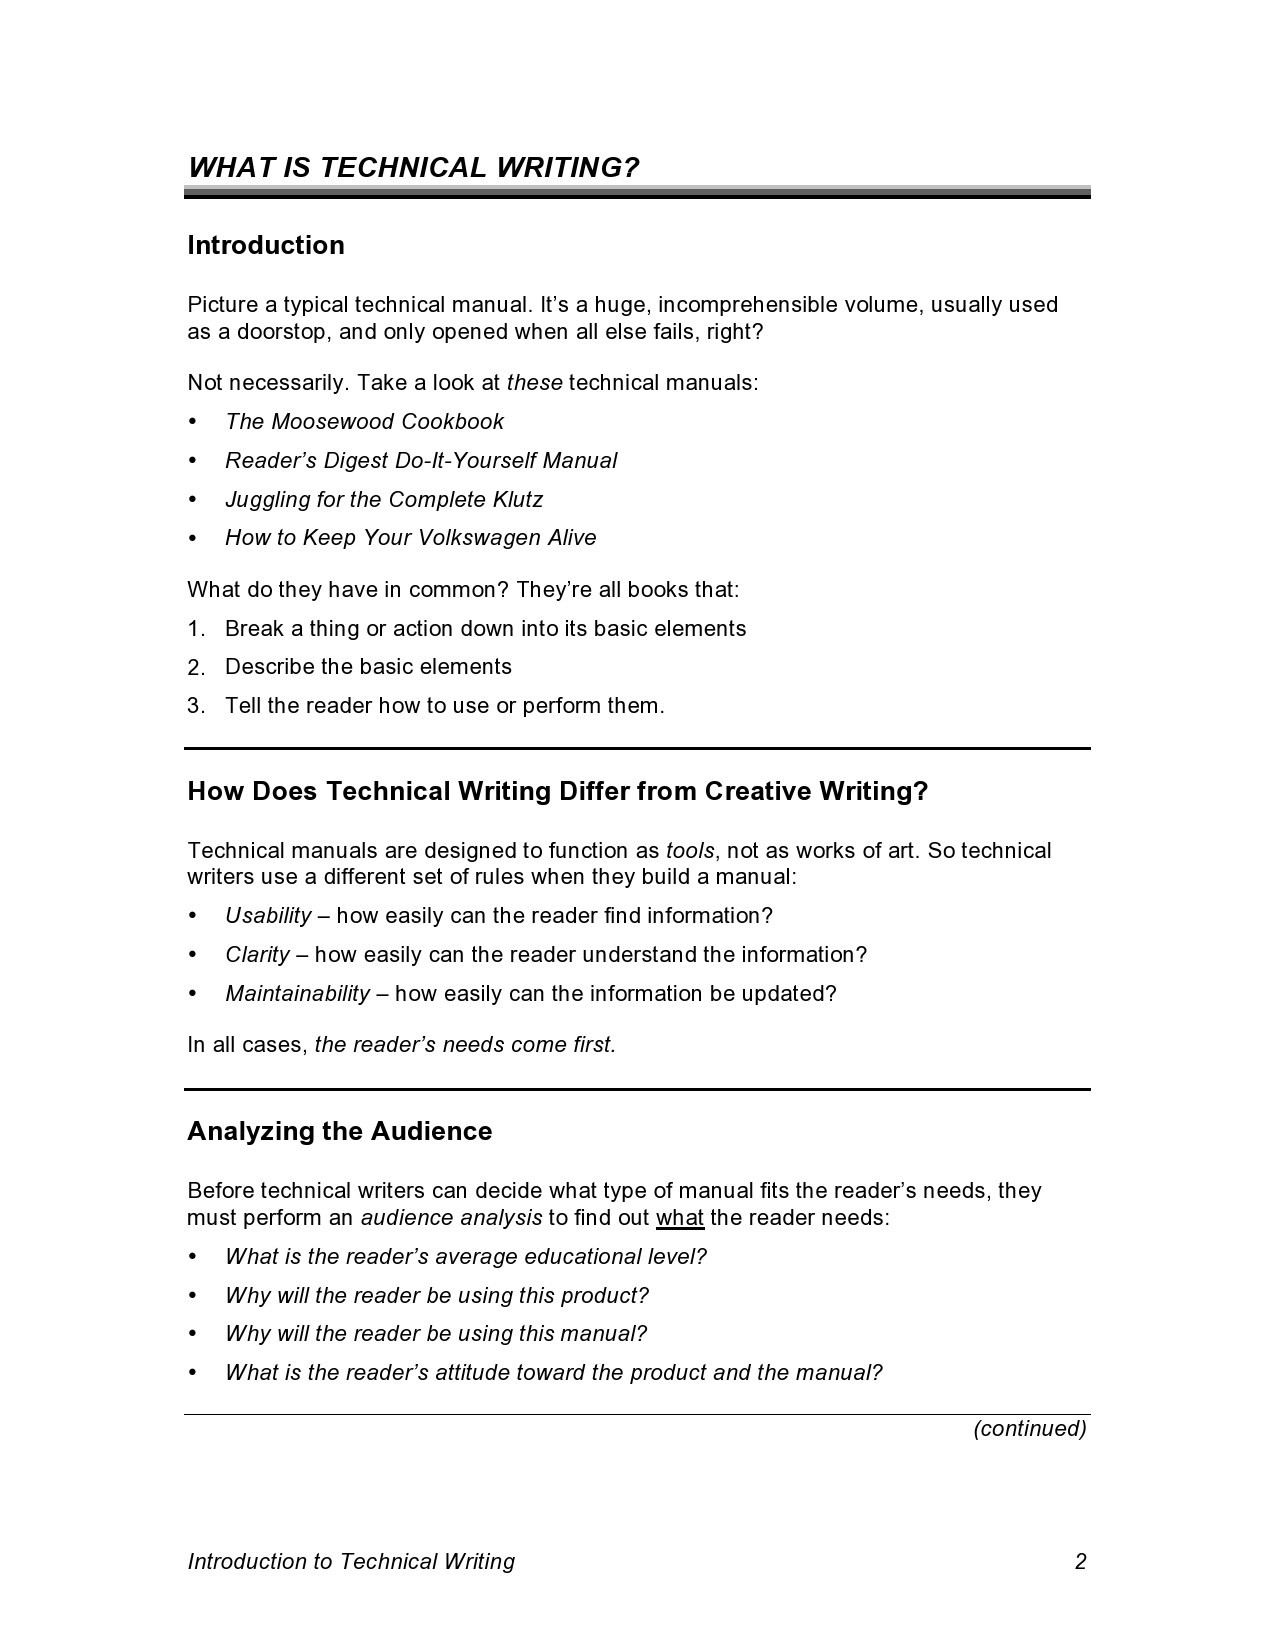 Free technical writing examples 30